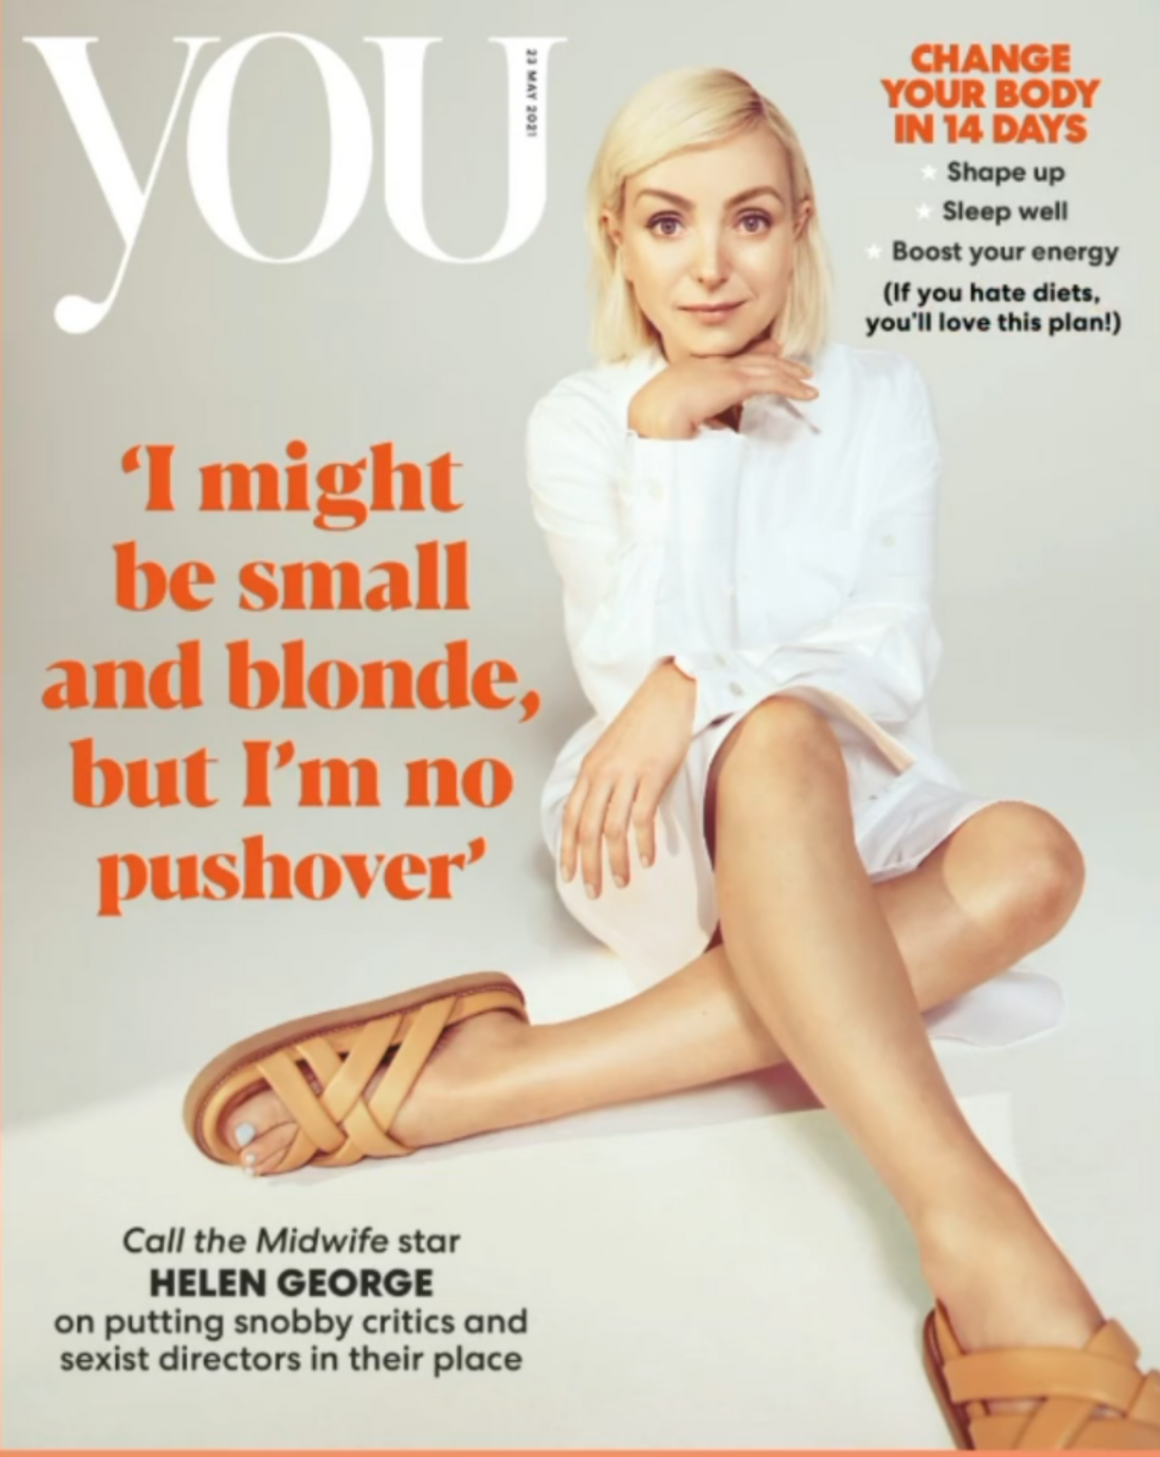 HELEN GEORGE UK You Magazine May 2021 CALL THE MIDWIFE